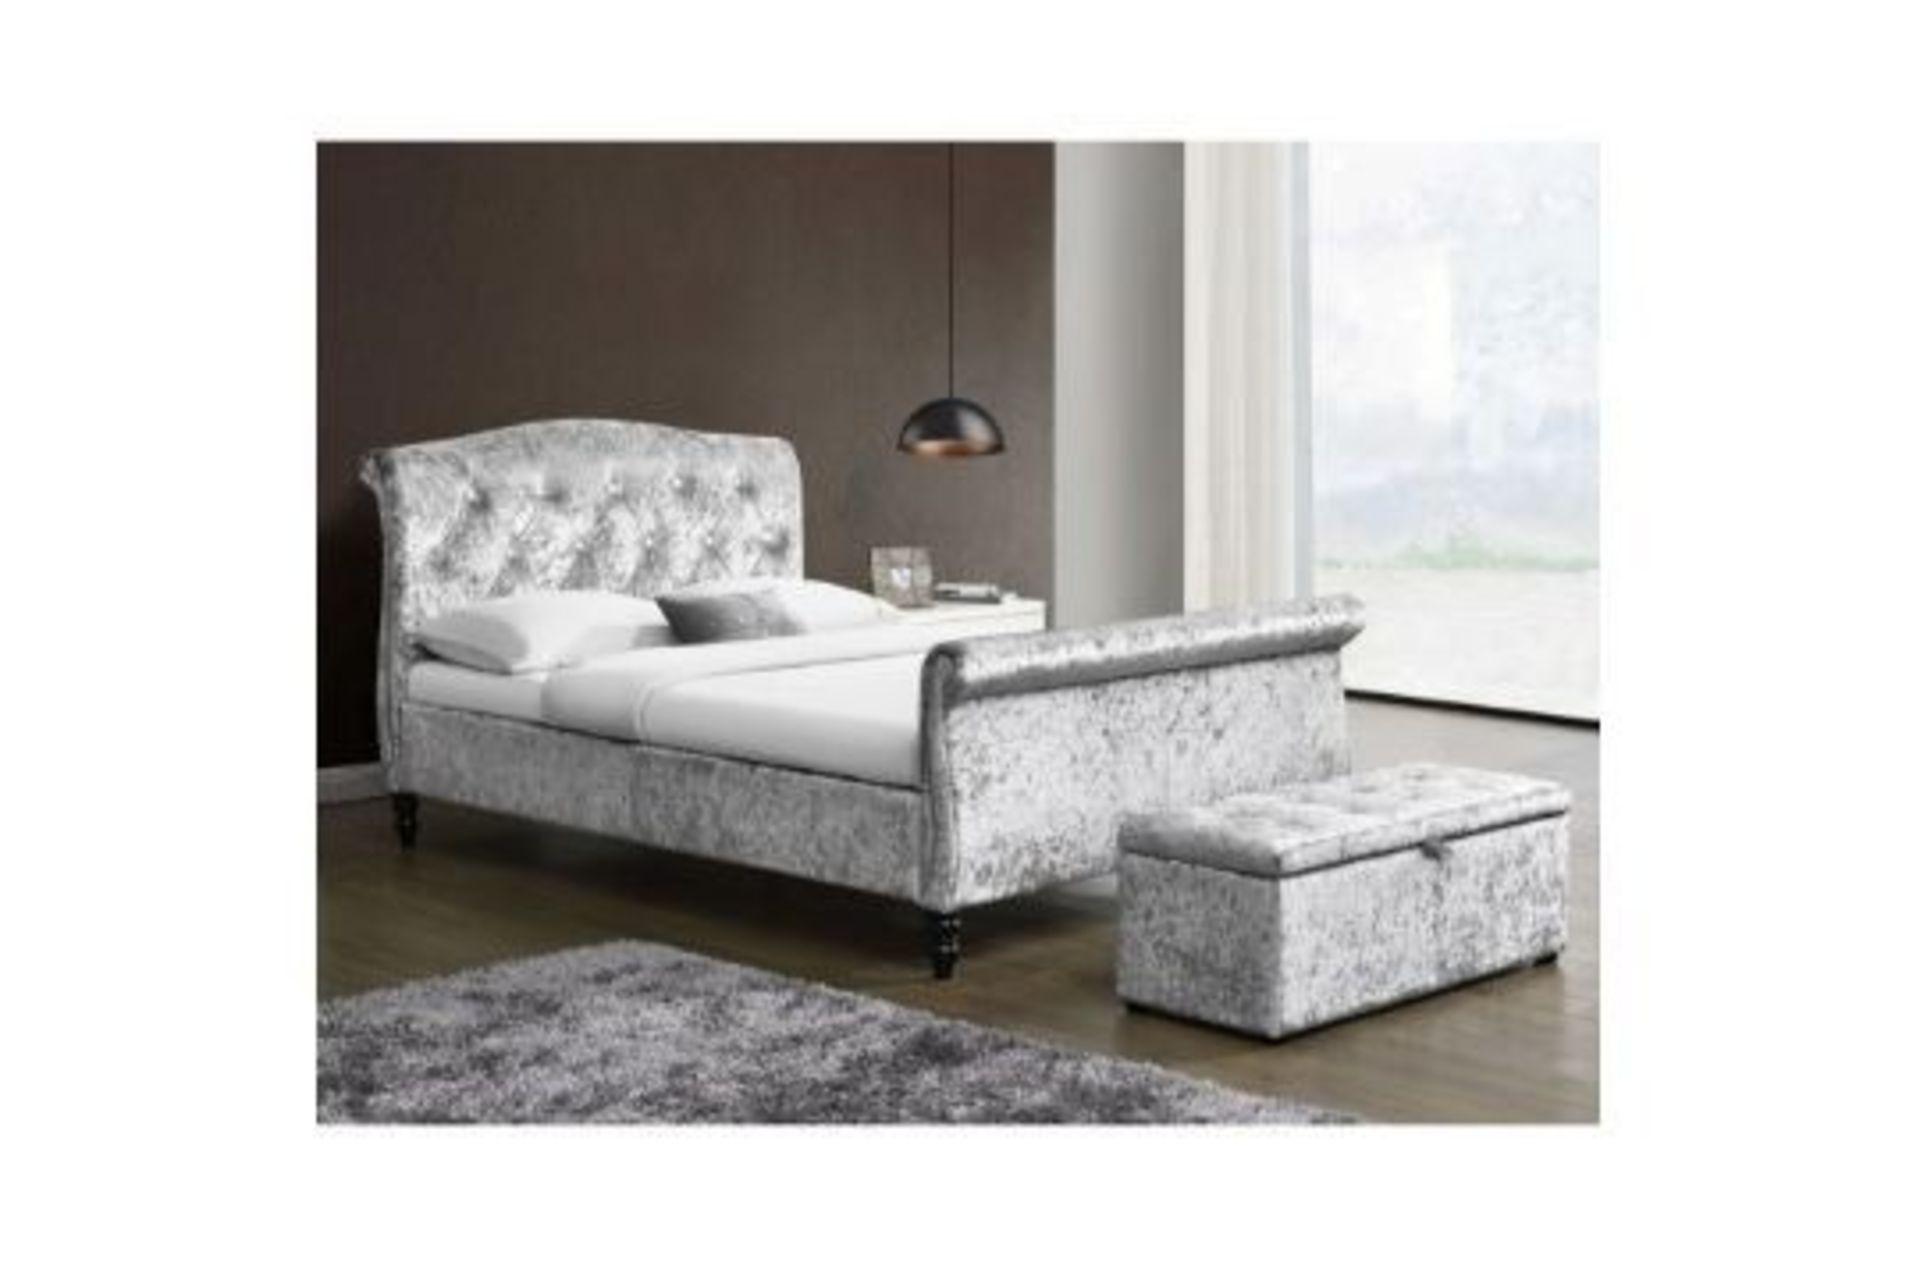 MEISSA Crushed Velvet Upholstered Double Bed with Diamante Headboard, Silver. - ER30